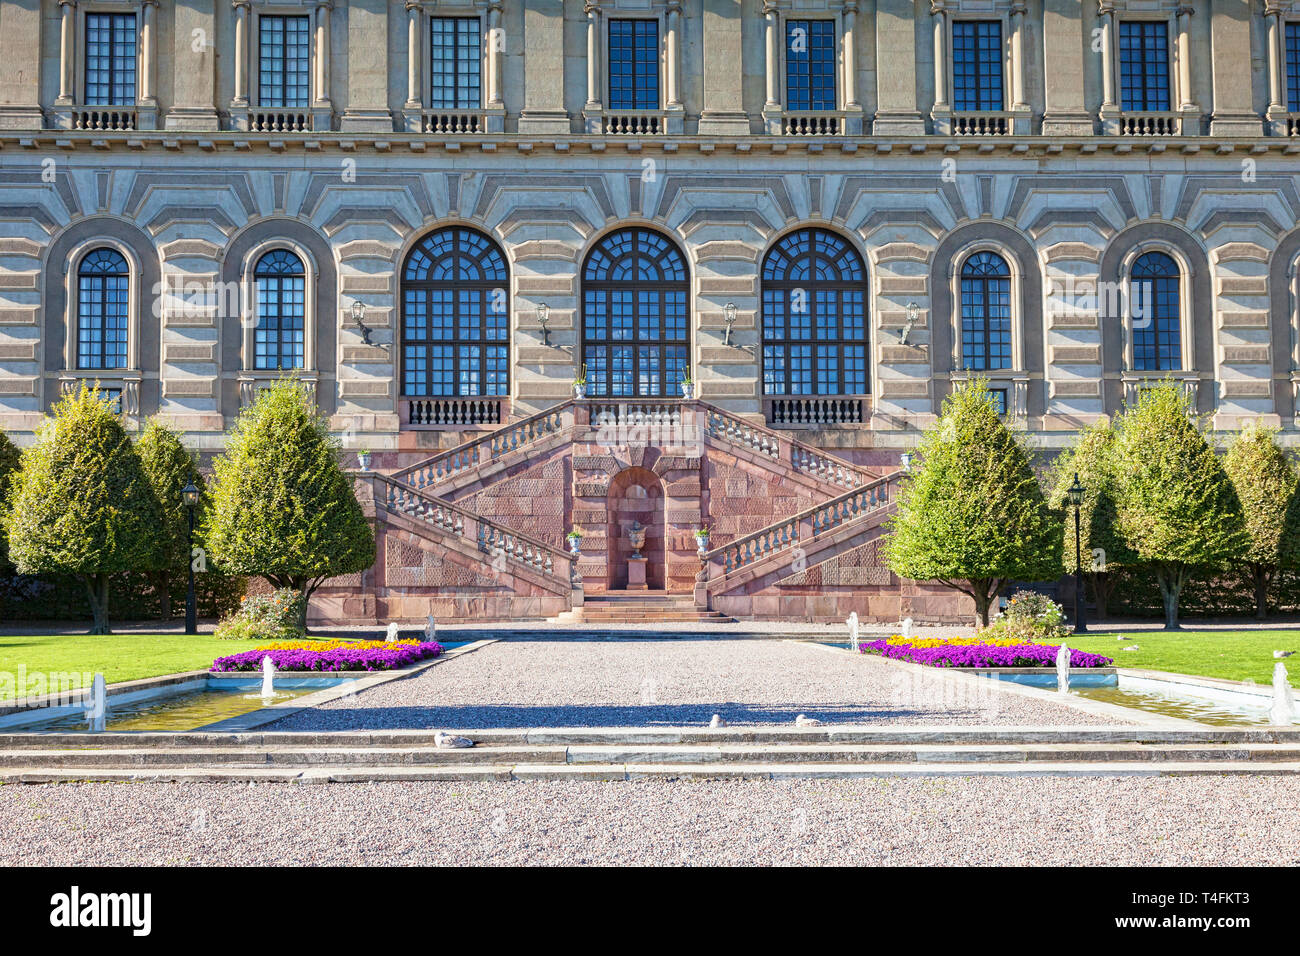 16 September 2018: Stockholm, Sweden - Detail of the Royal Palace and garden. Stock Photo